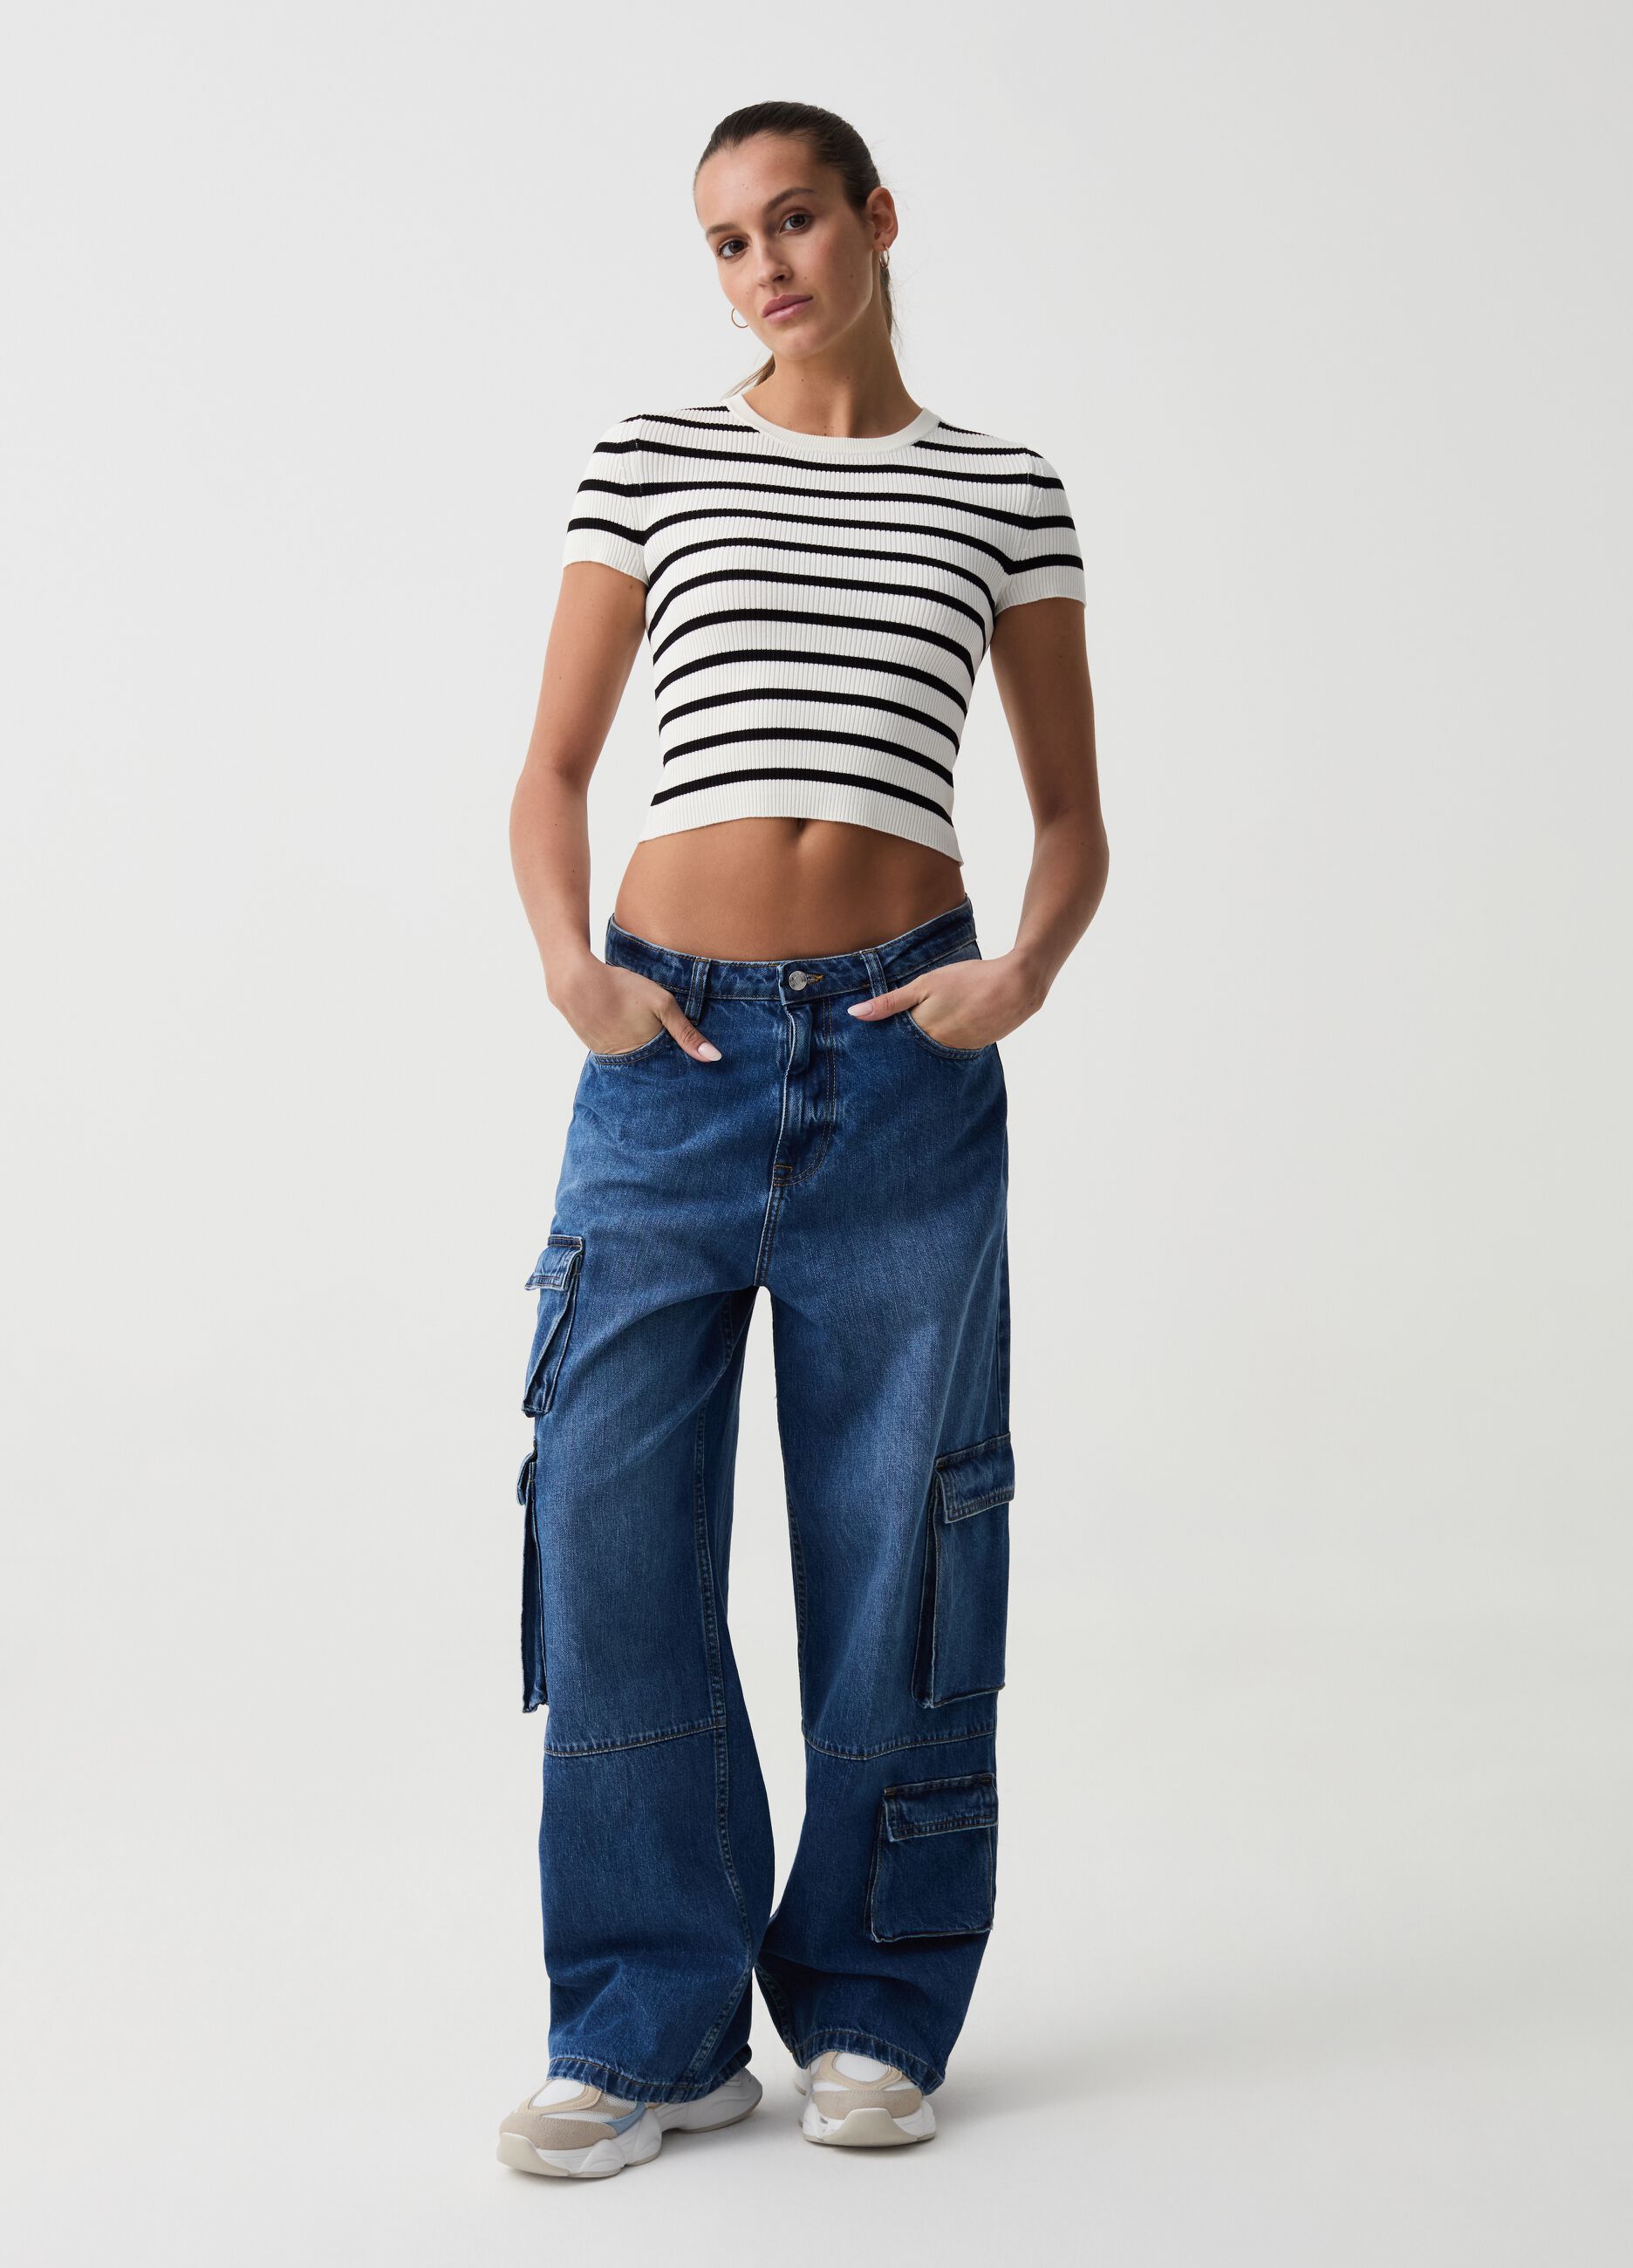 Ribbed crop T-shirt with striped pattern